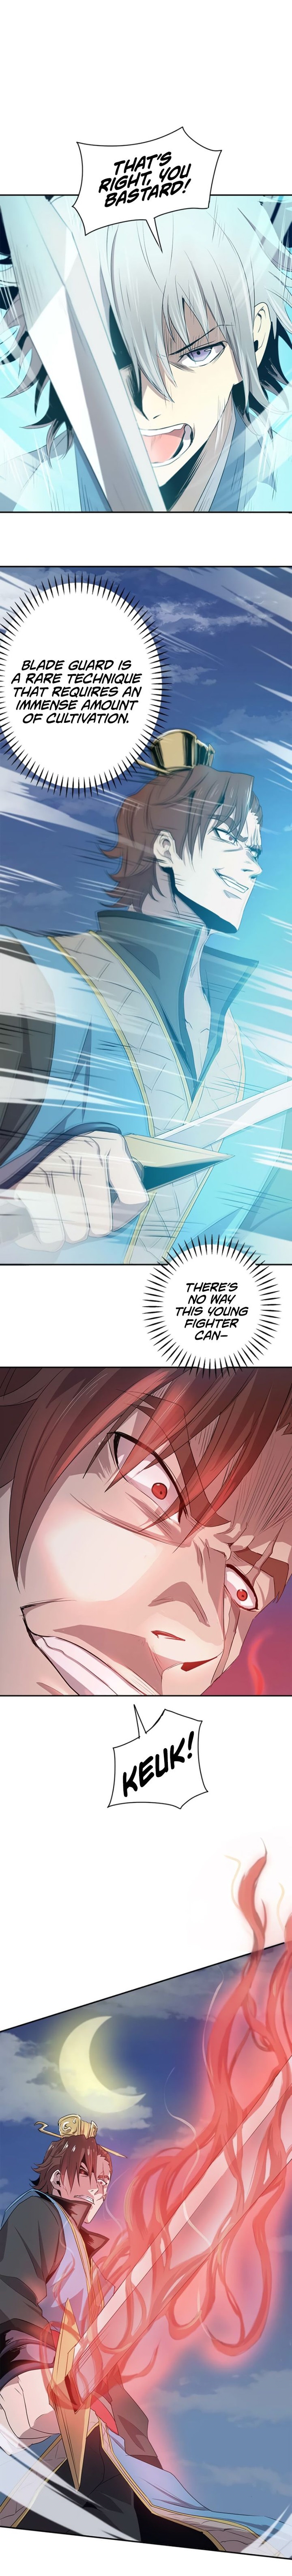 Strongest Fighter 16 5